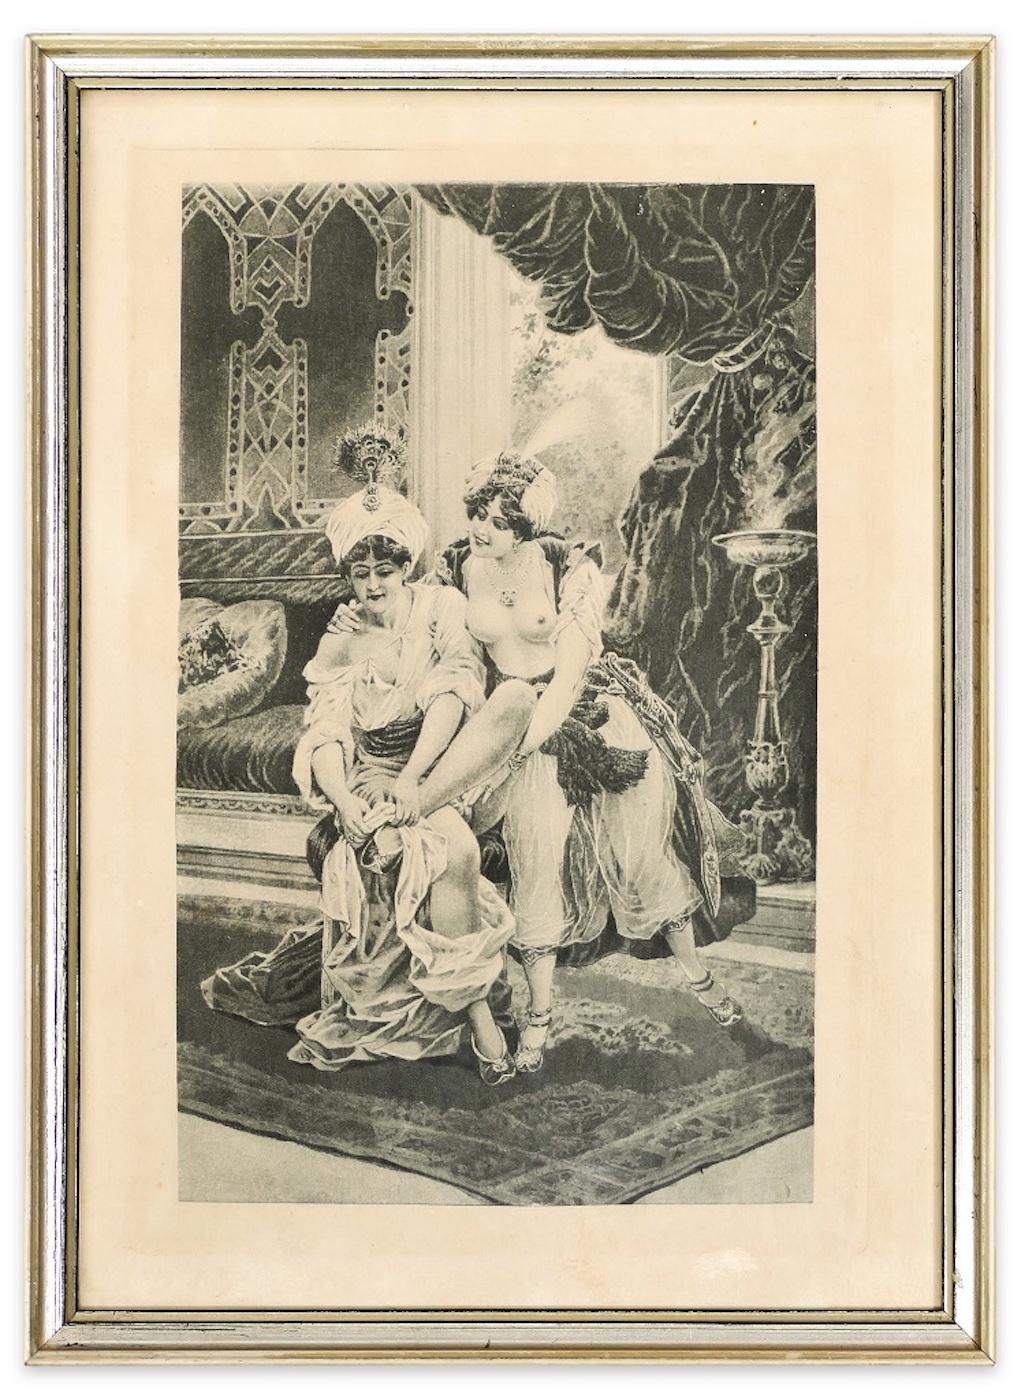 The Harem - Heliogravure - 1906 - Print by Unknown